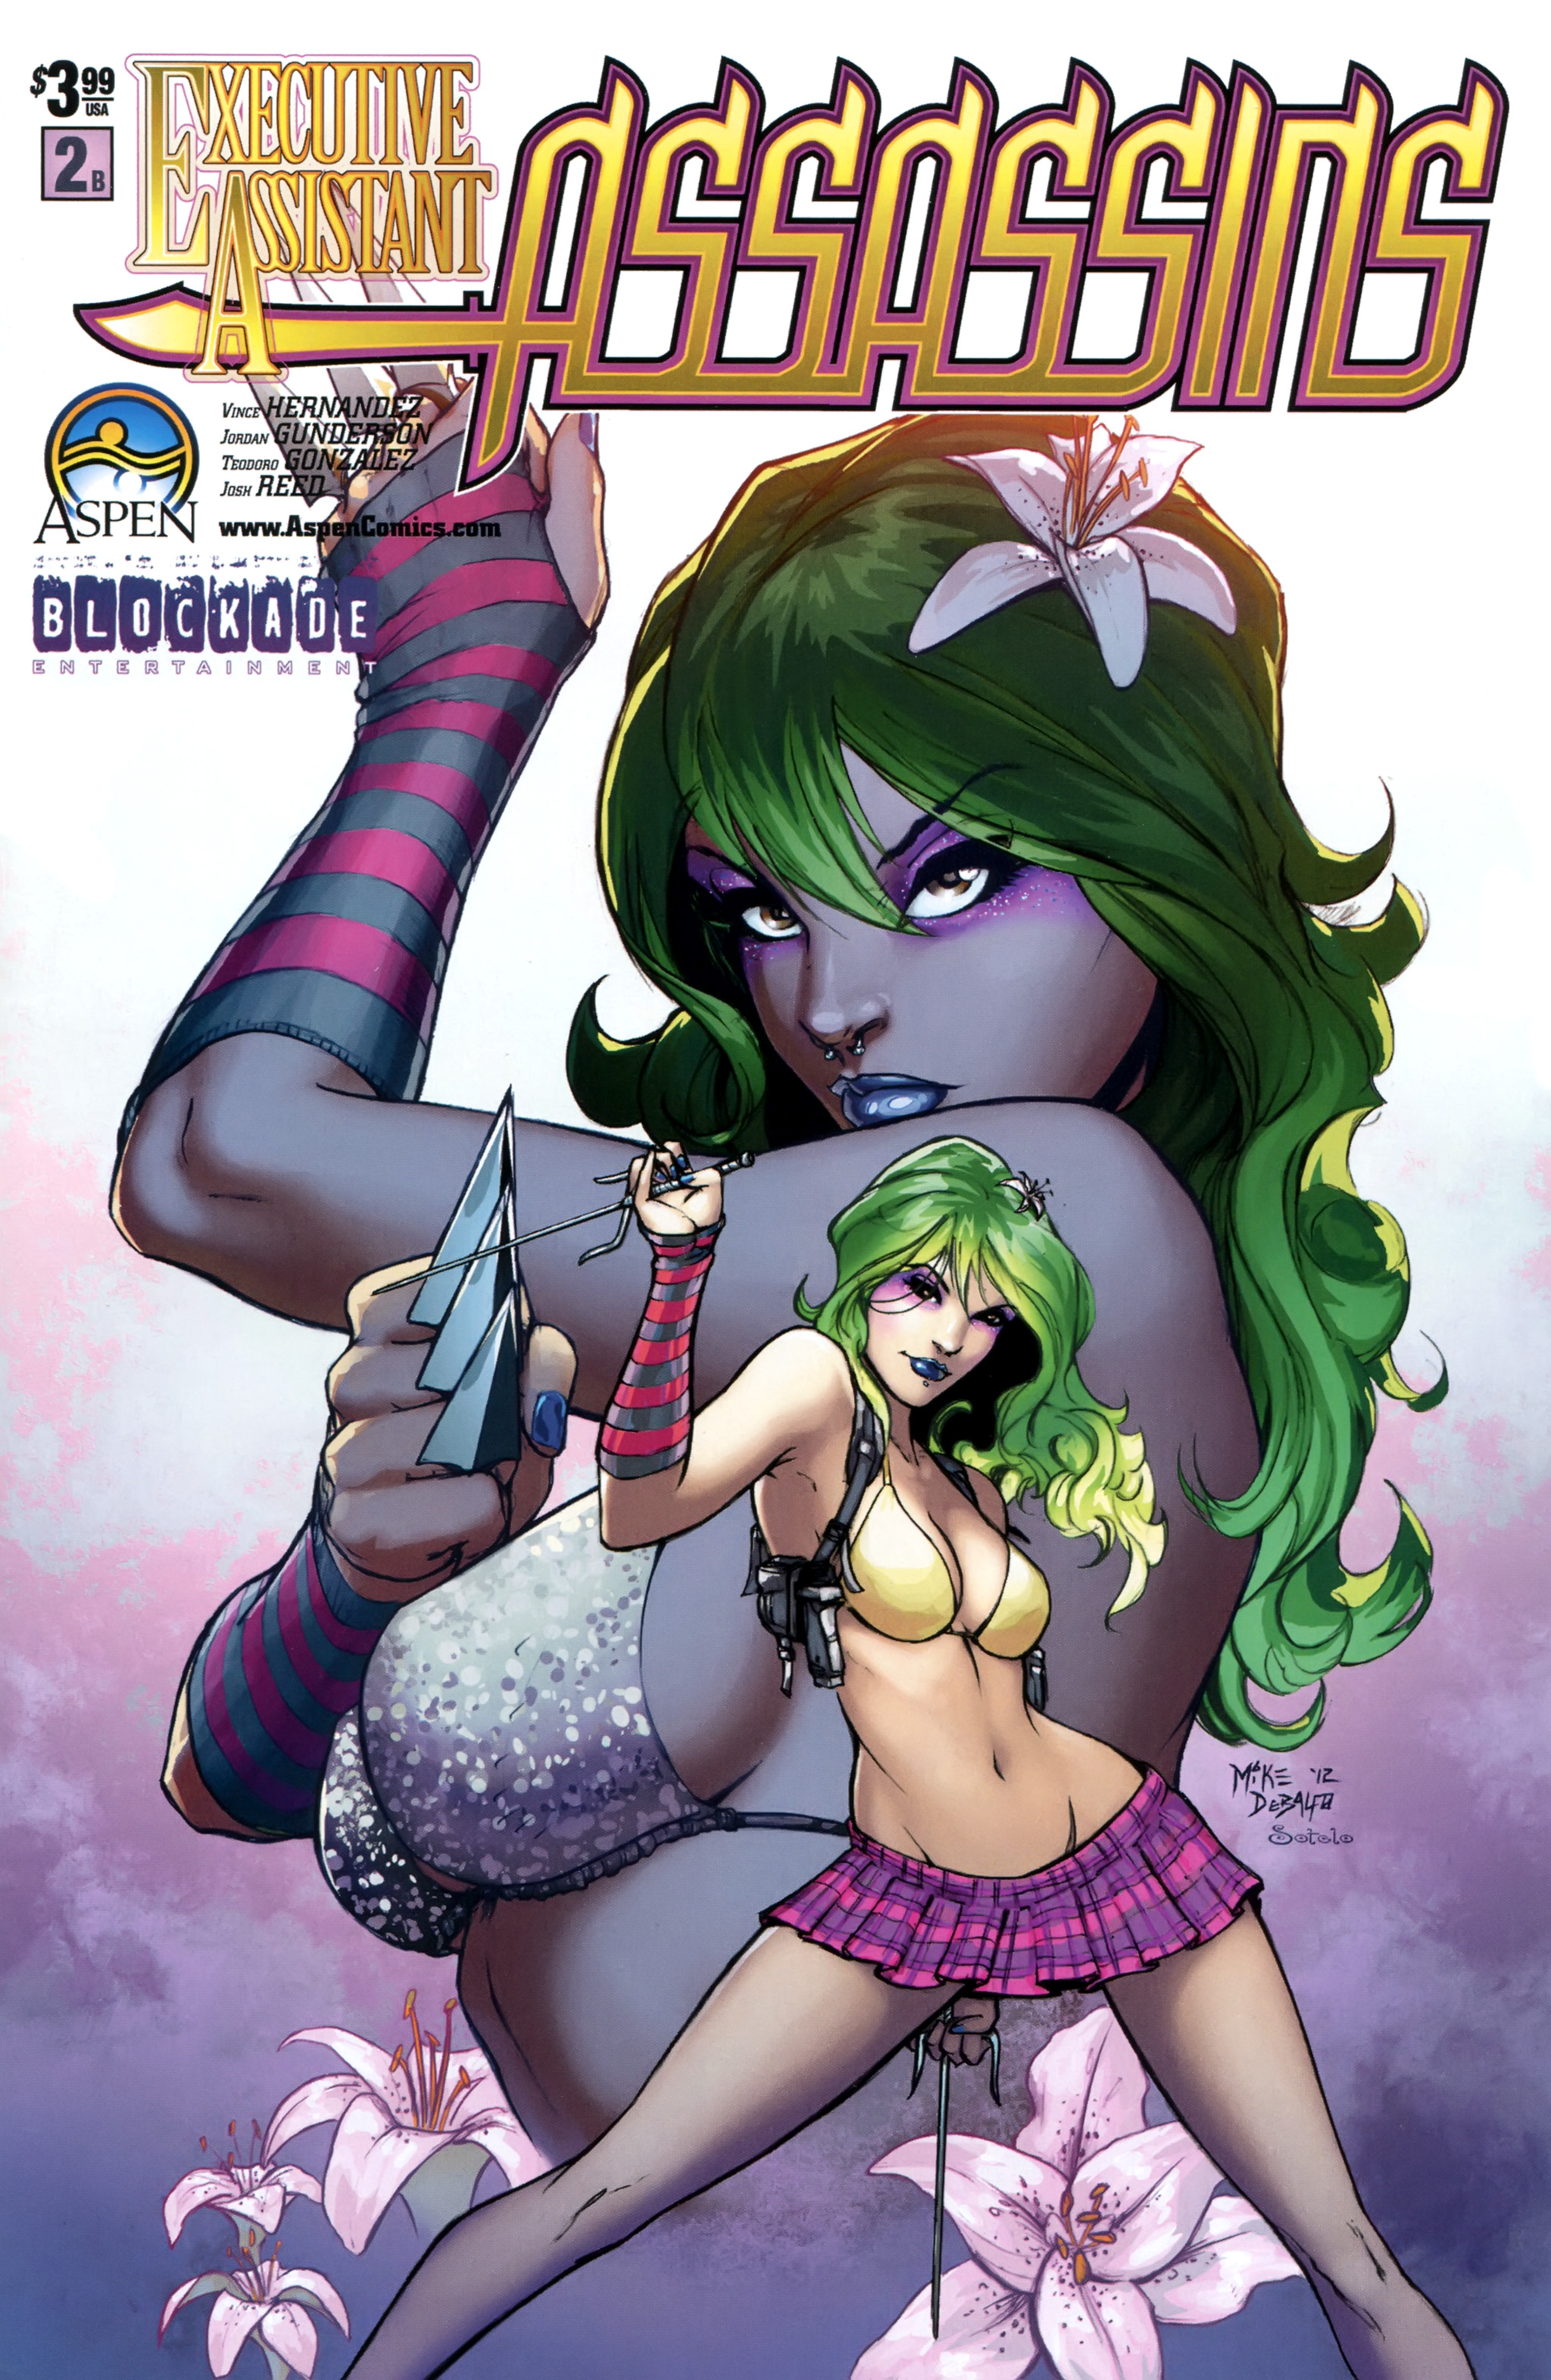 Read online Executive Assistant: Assassins comic -  Issue #2 - 2